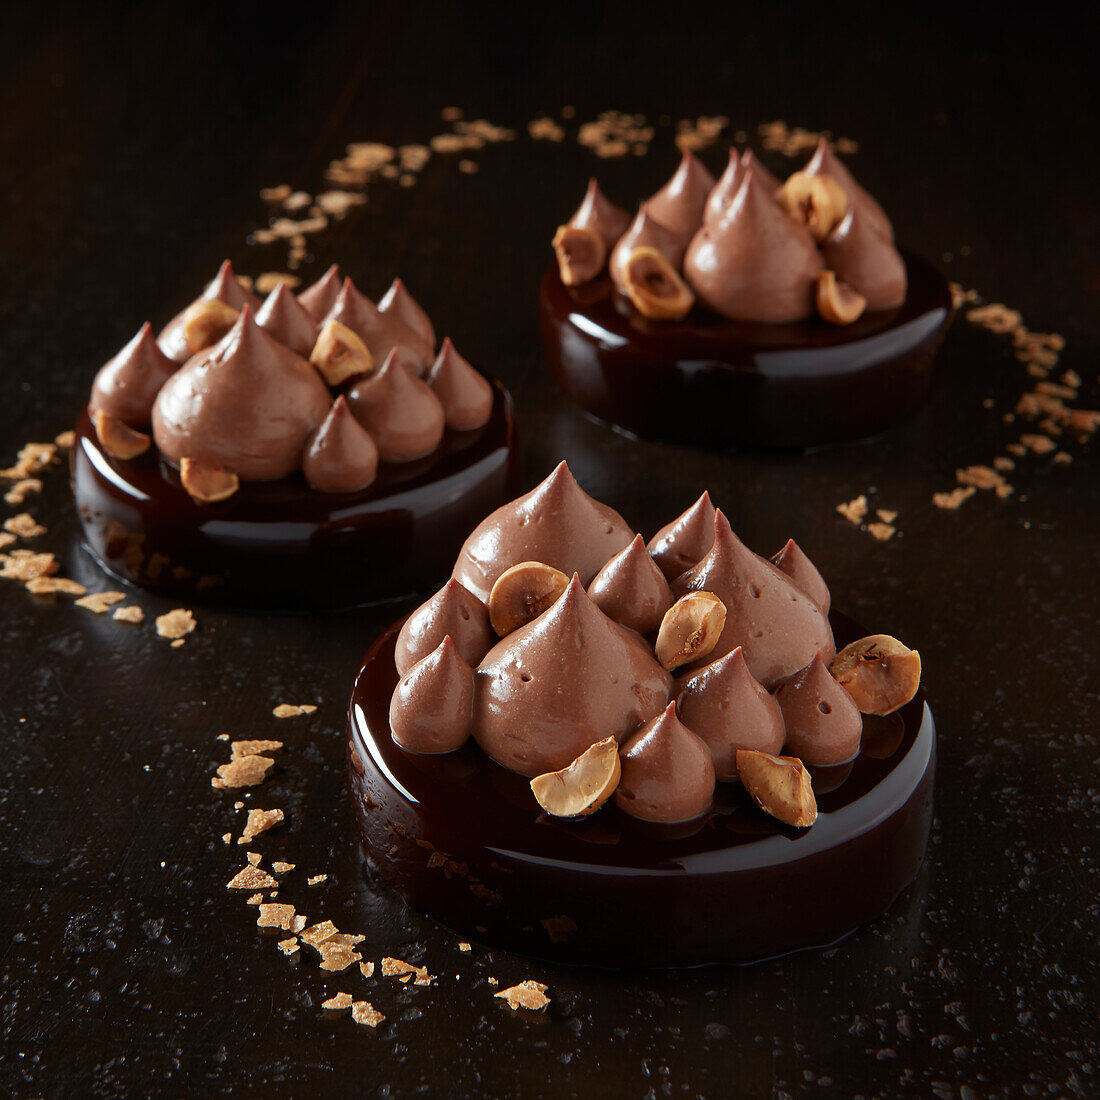 Mini mirror cakes with chocolate mousse